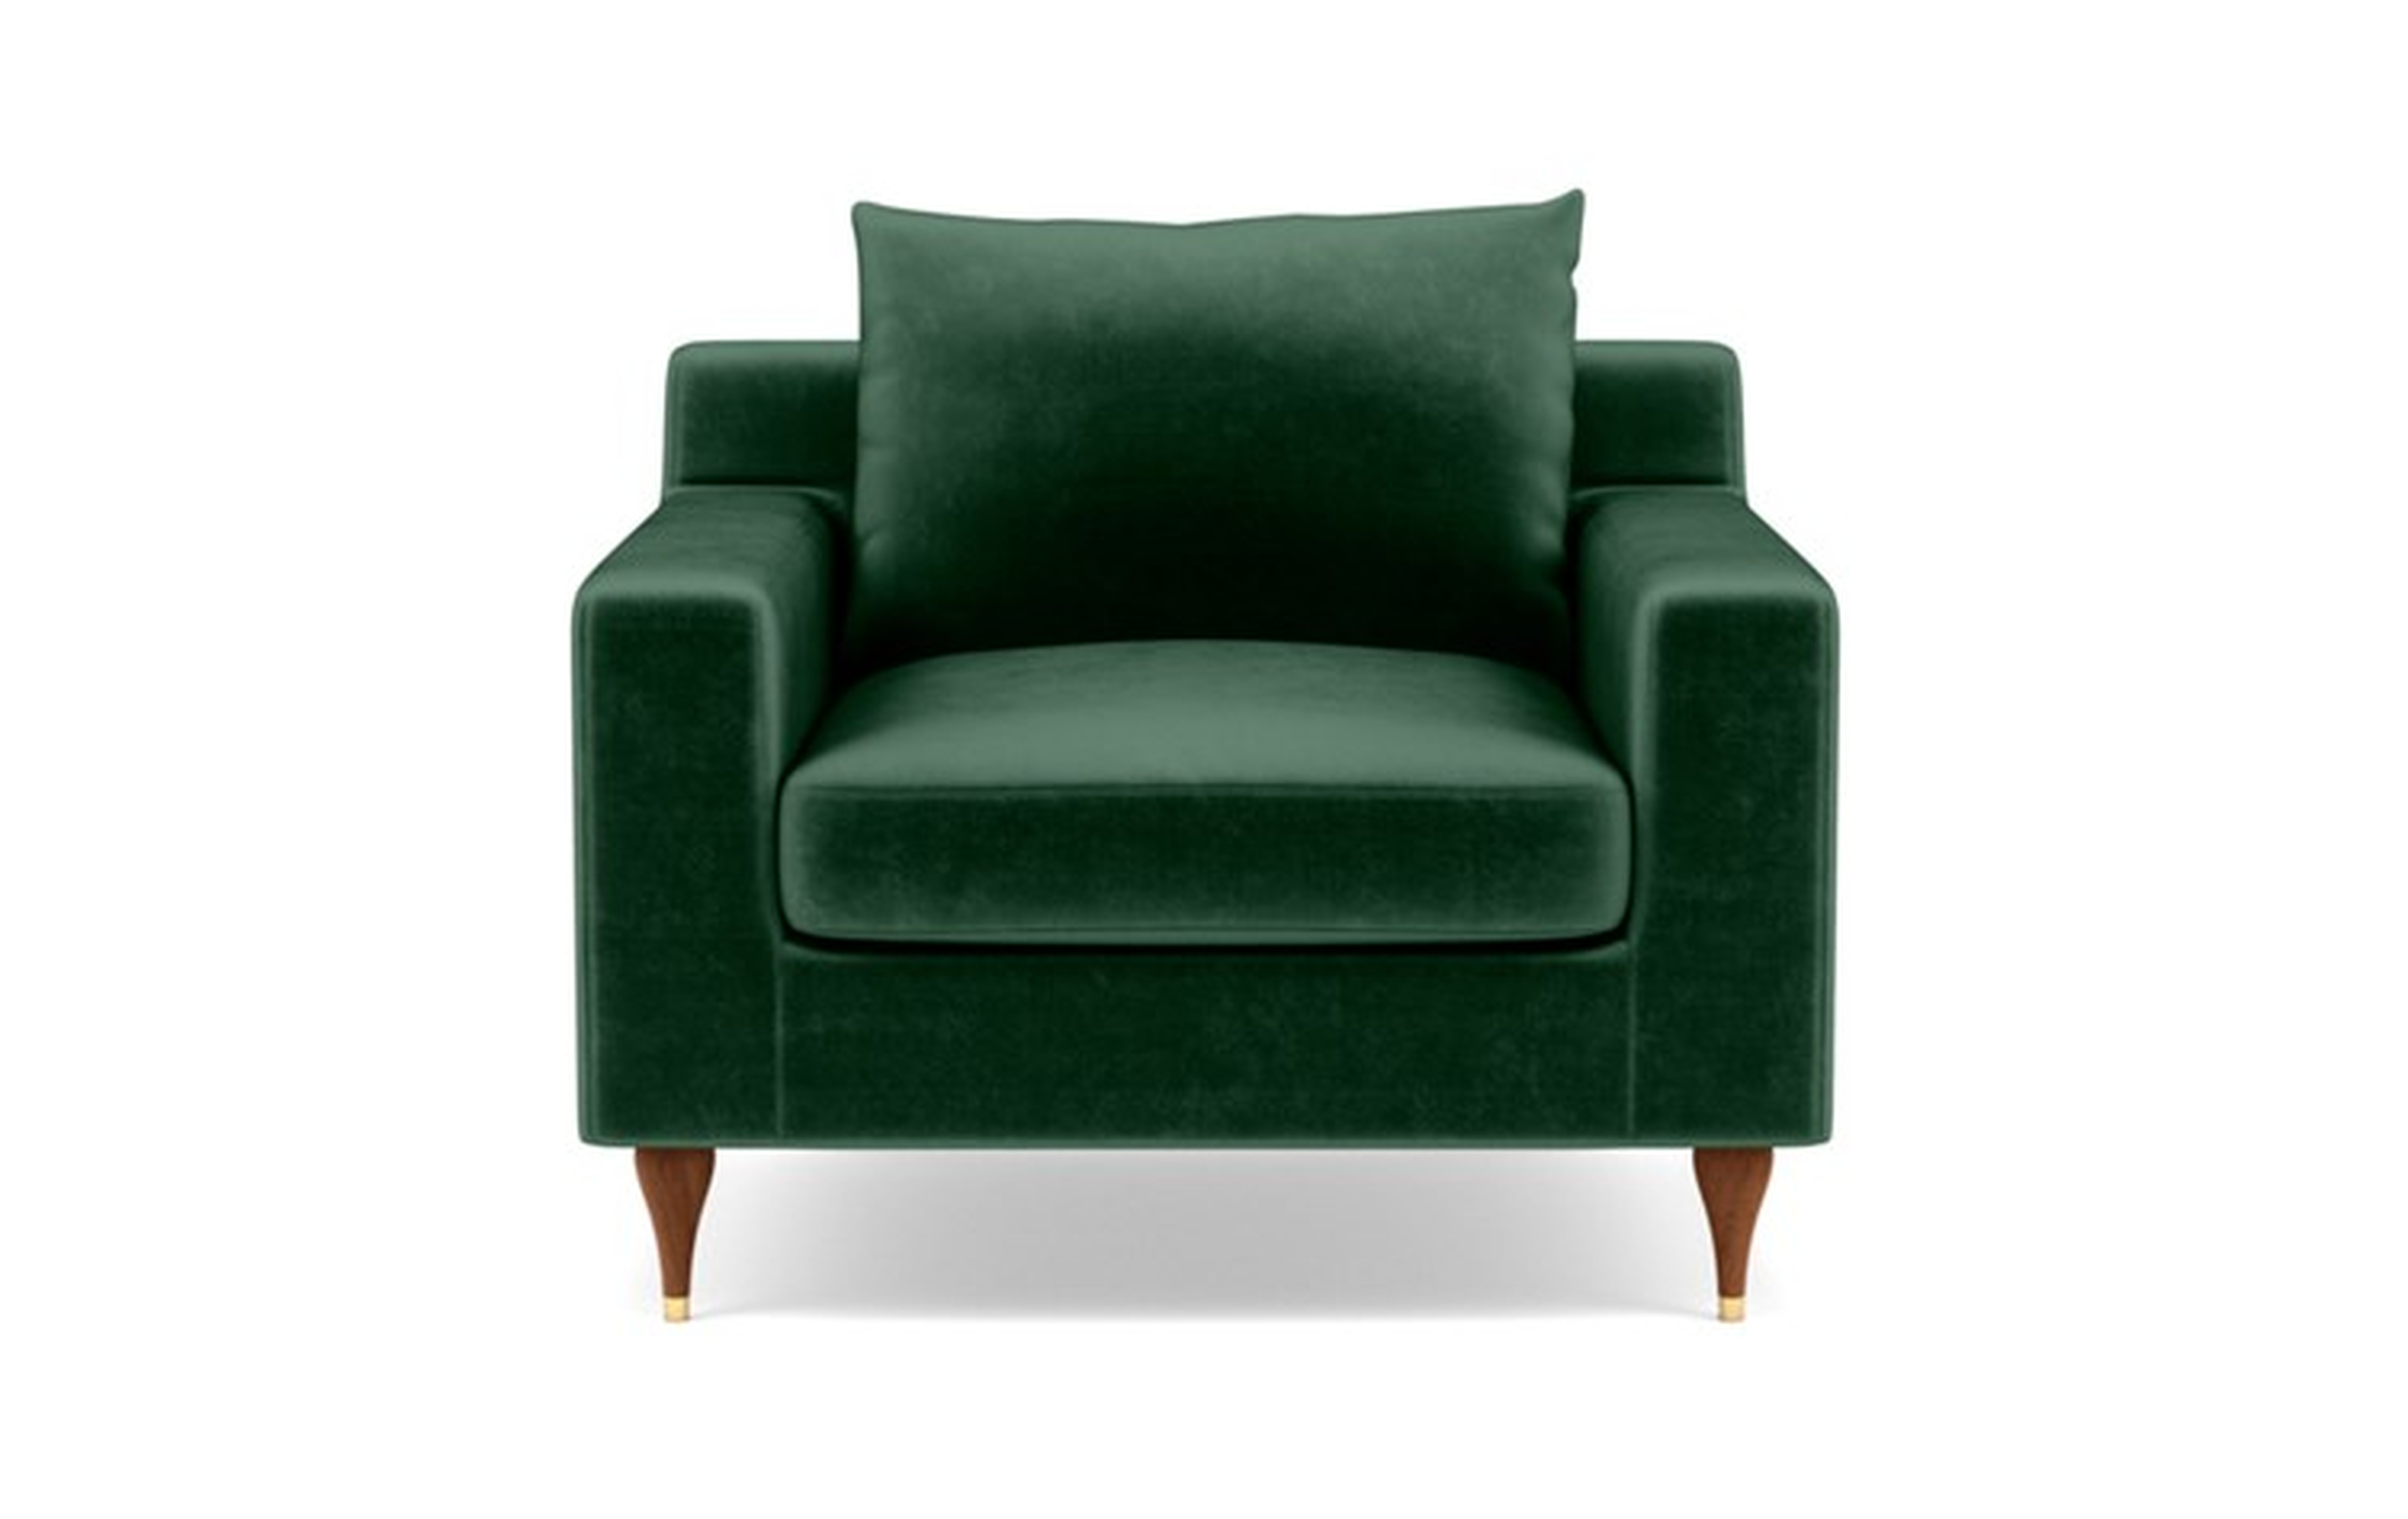 Sloan Accent Chair with Green Malachite Fabric, down alternative cushions, and Oiled Walnut with Brass Cap legs - Interior Define